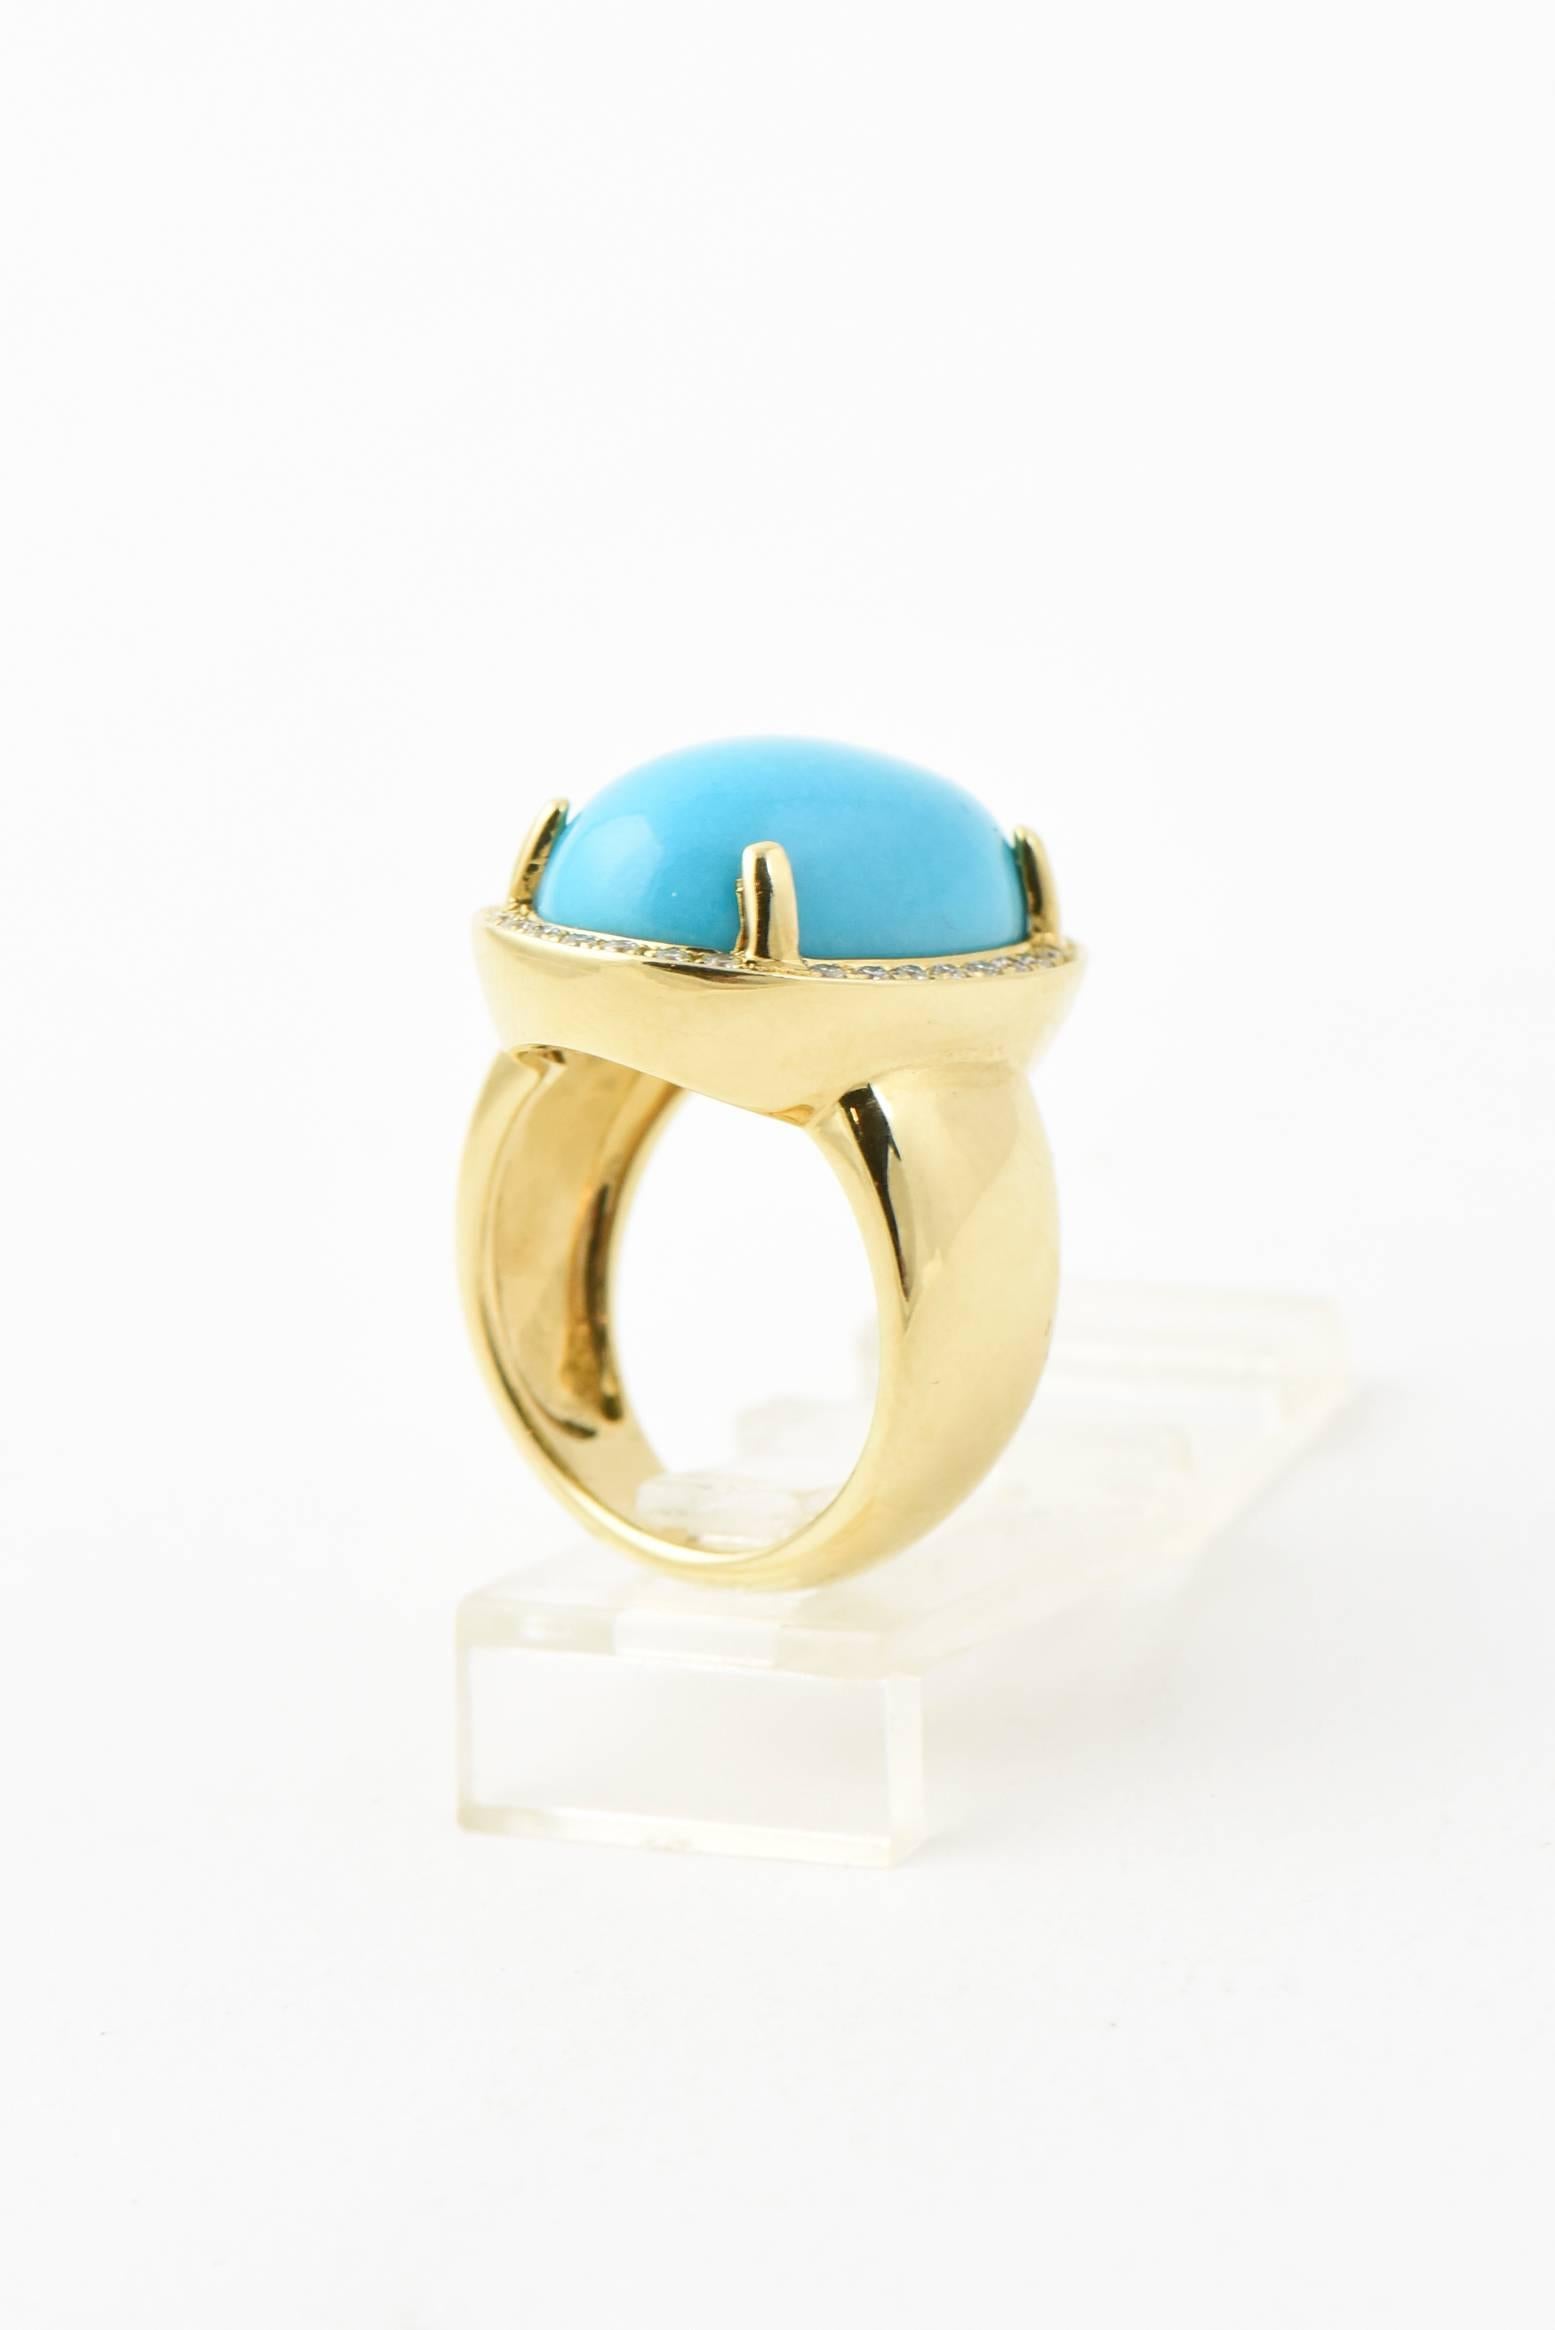 Rina Limor
Oval Precious Turquoise Cabochon Ring with Diamonds, Size 5.75
Ring by Rina Limor Fine Jewelry.
18-karat yellw gold tapered band.
Prong-set, Turquoise cabochon surronded a row of pavé white diamonds trim.

approx. 8